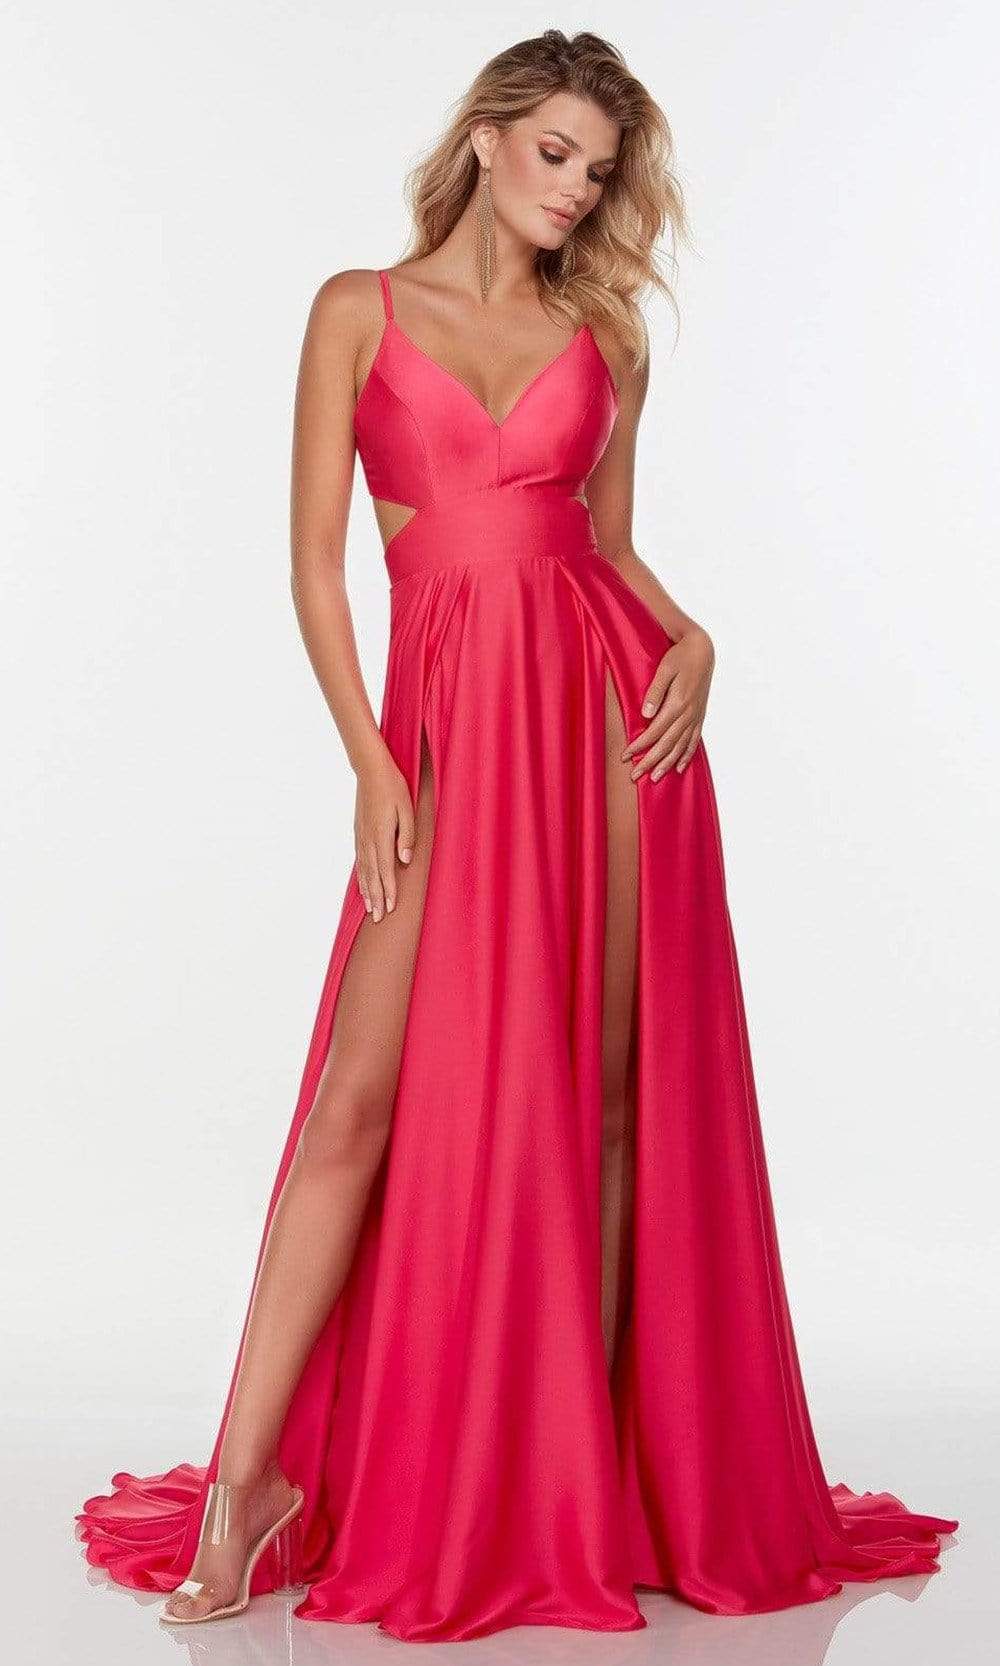 Alyce Paris - 61140 Long Cutout Accented Gown Special Occasion Dress